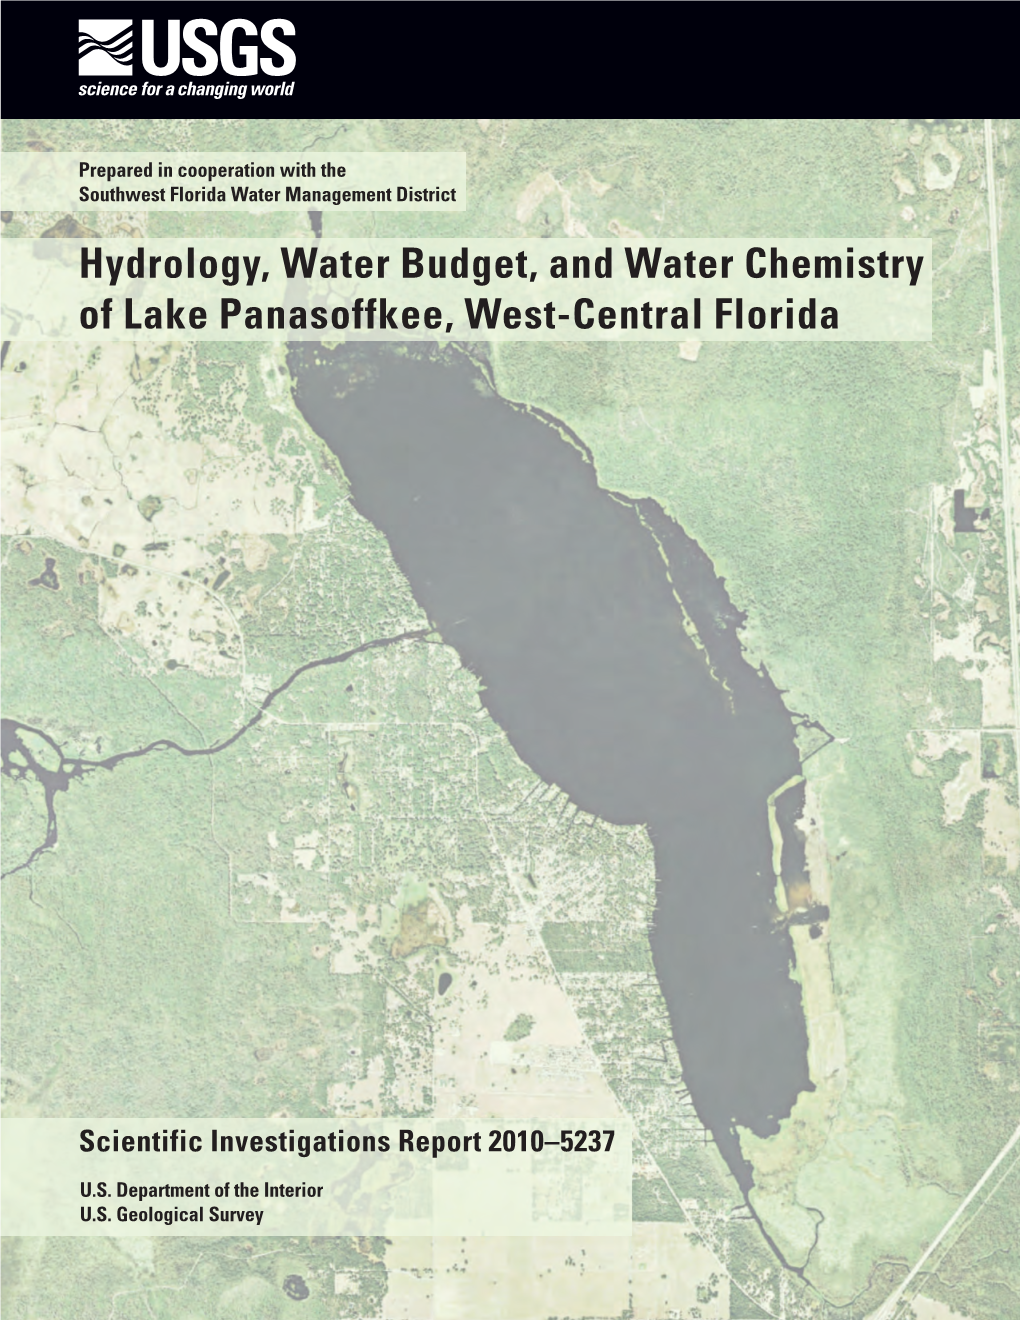 Hydrology, Water Budget, and Water Chemistry of Lake Panasoffkee, West-Central Florida